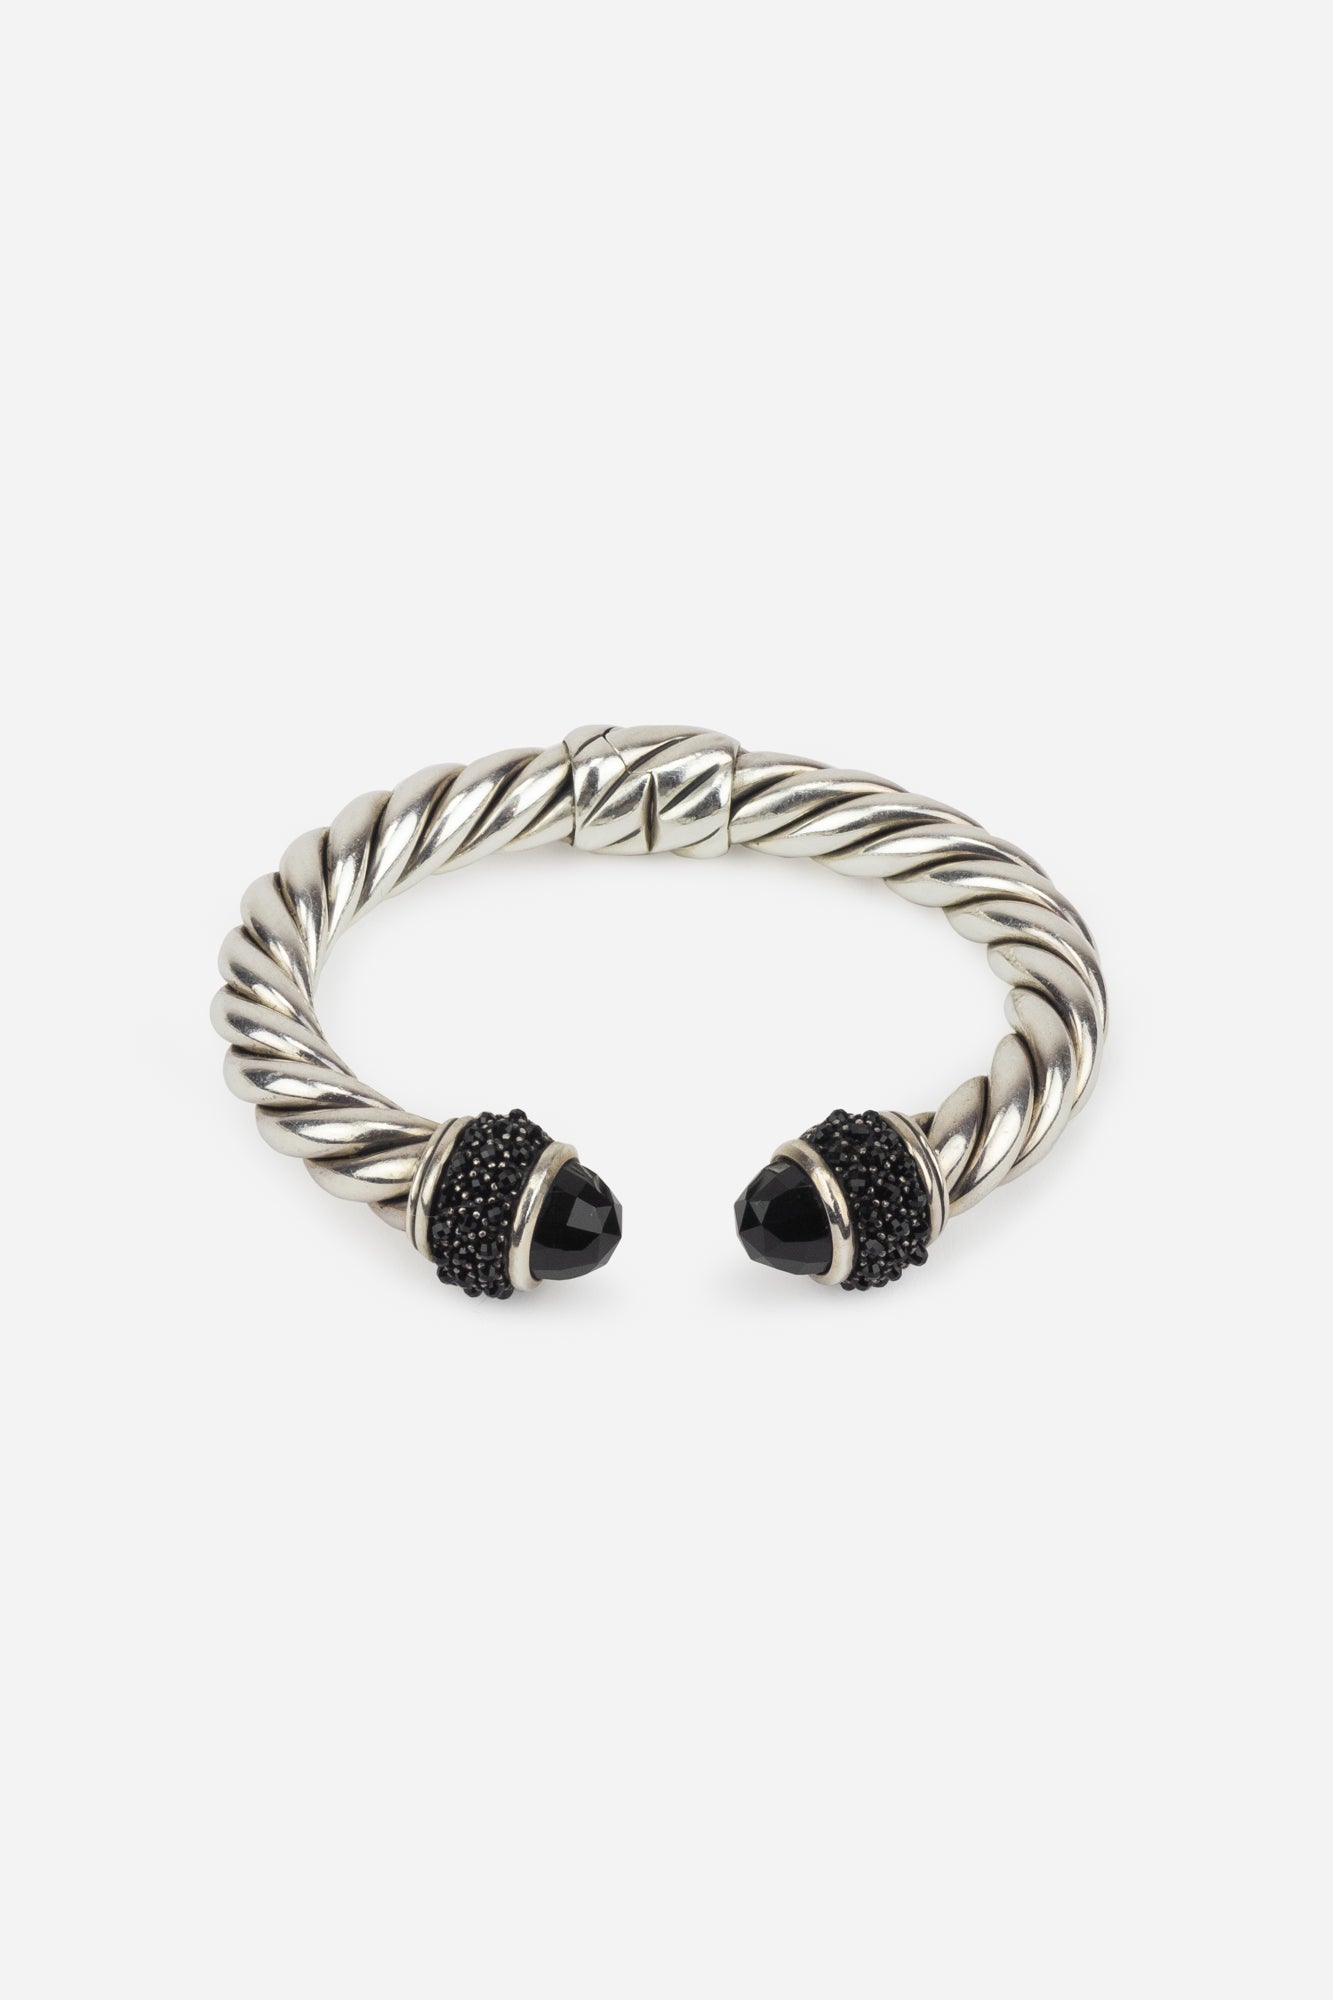 Silver, Onyx and Black Diamonds Cable Cuff Bracelet